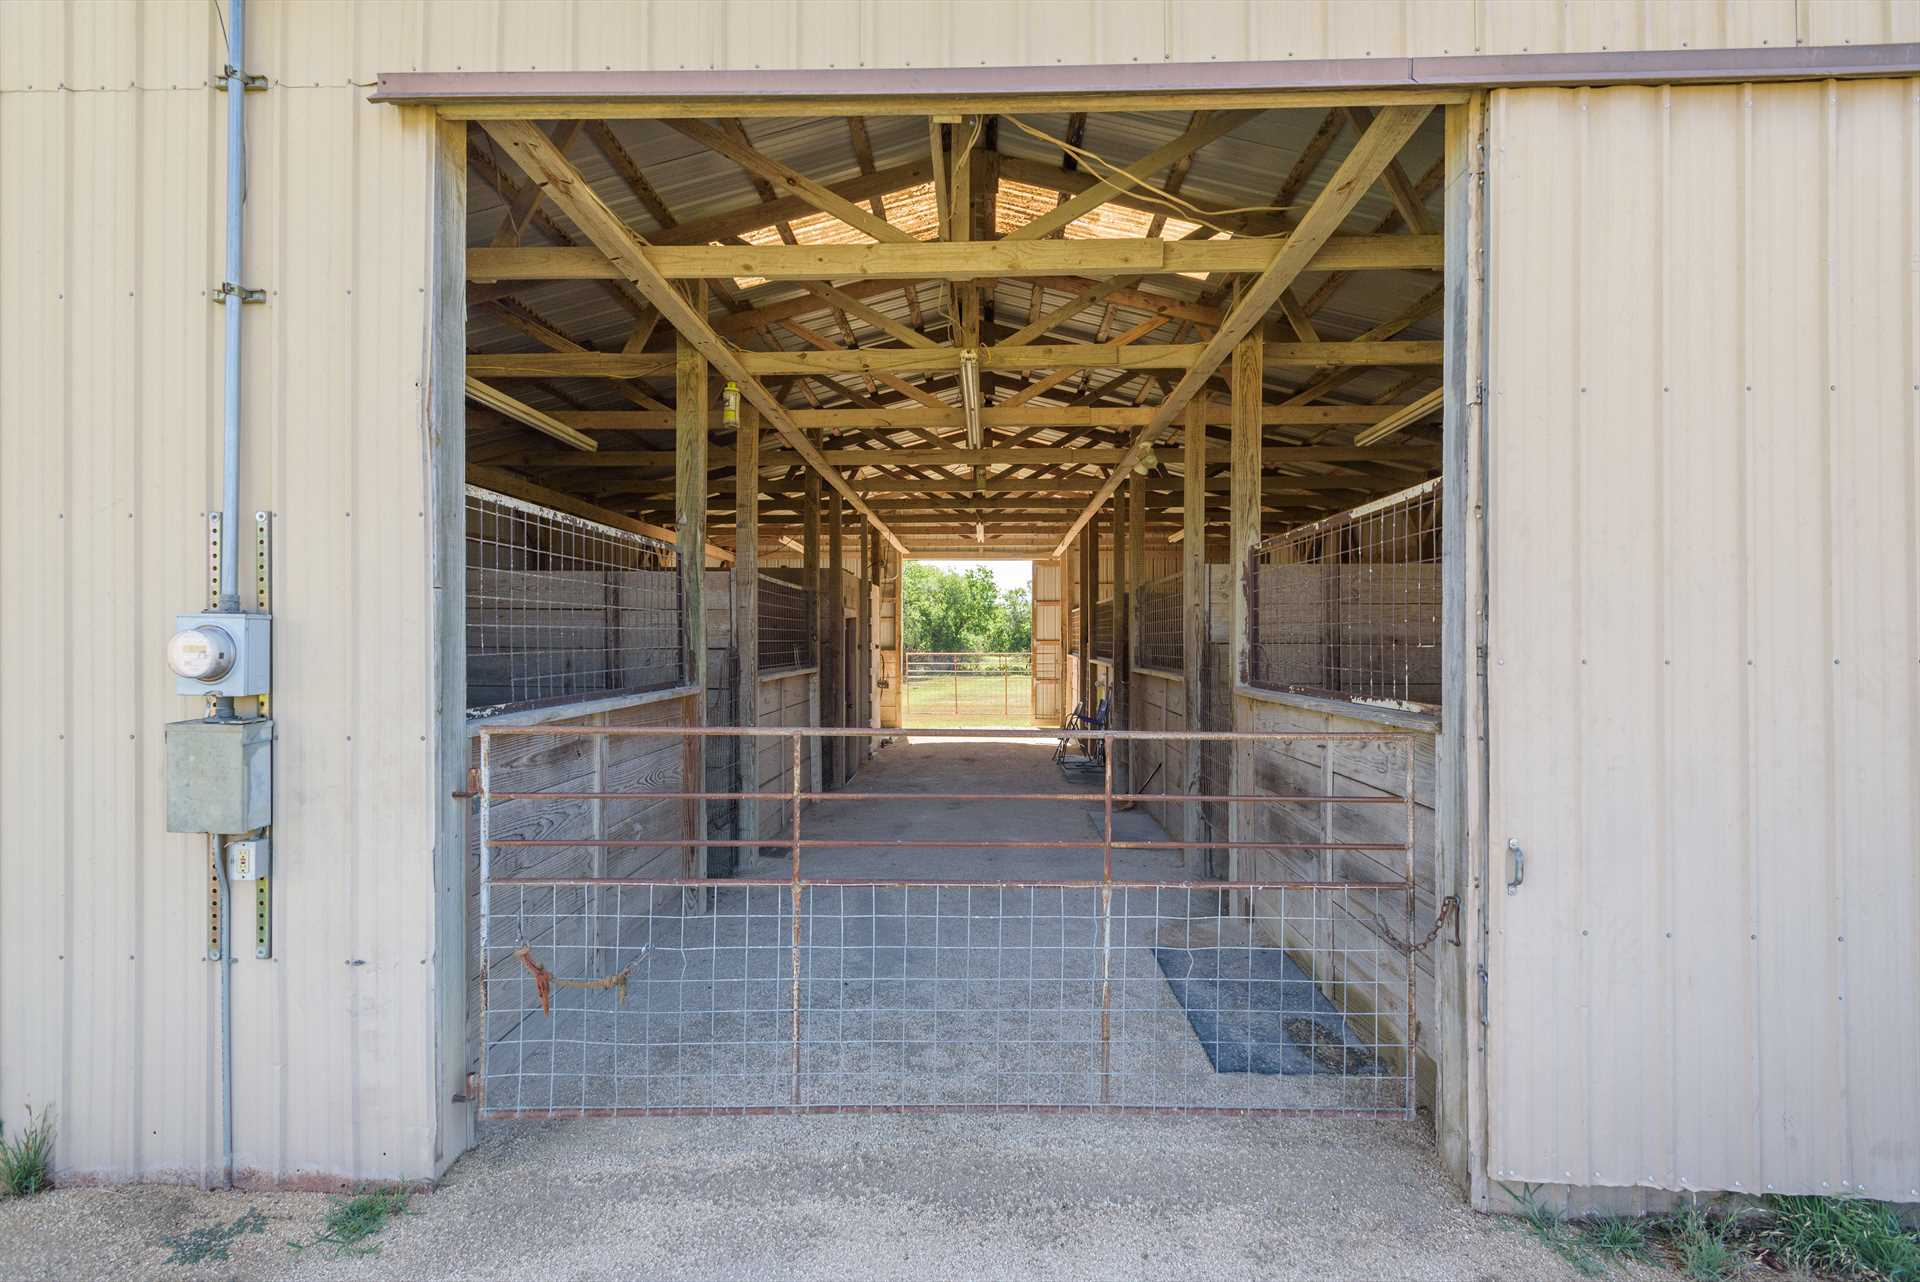                                                 Ask us about the stable space, riding pasture, and other horse-friendly features at Roulette Ranch!